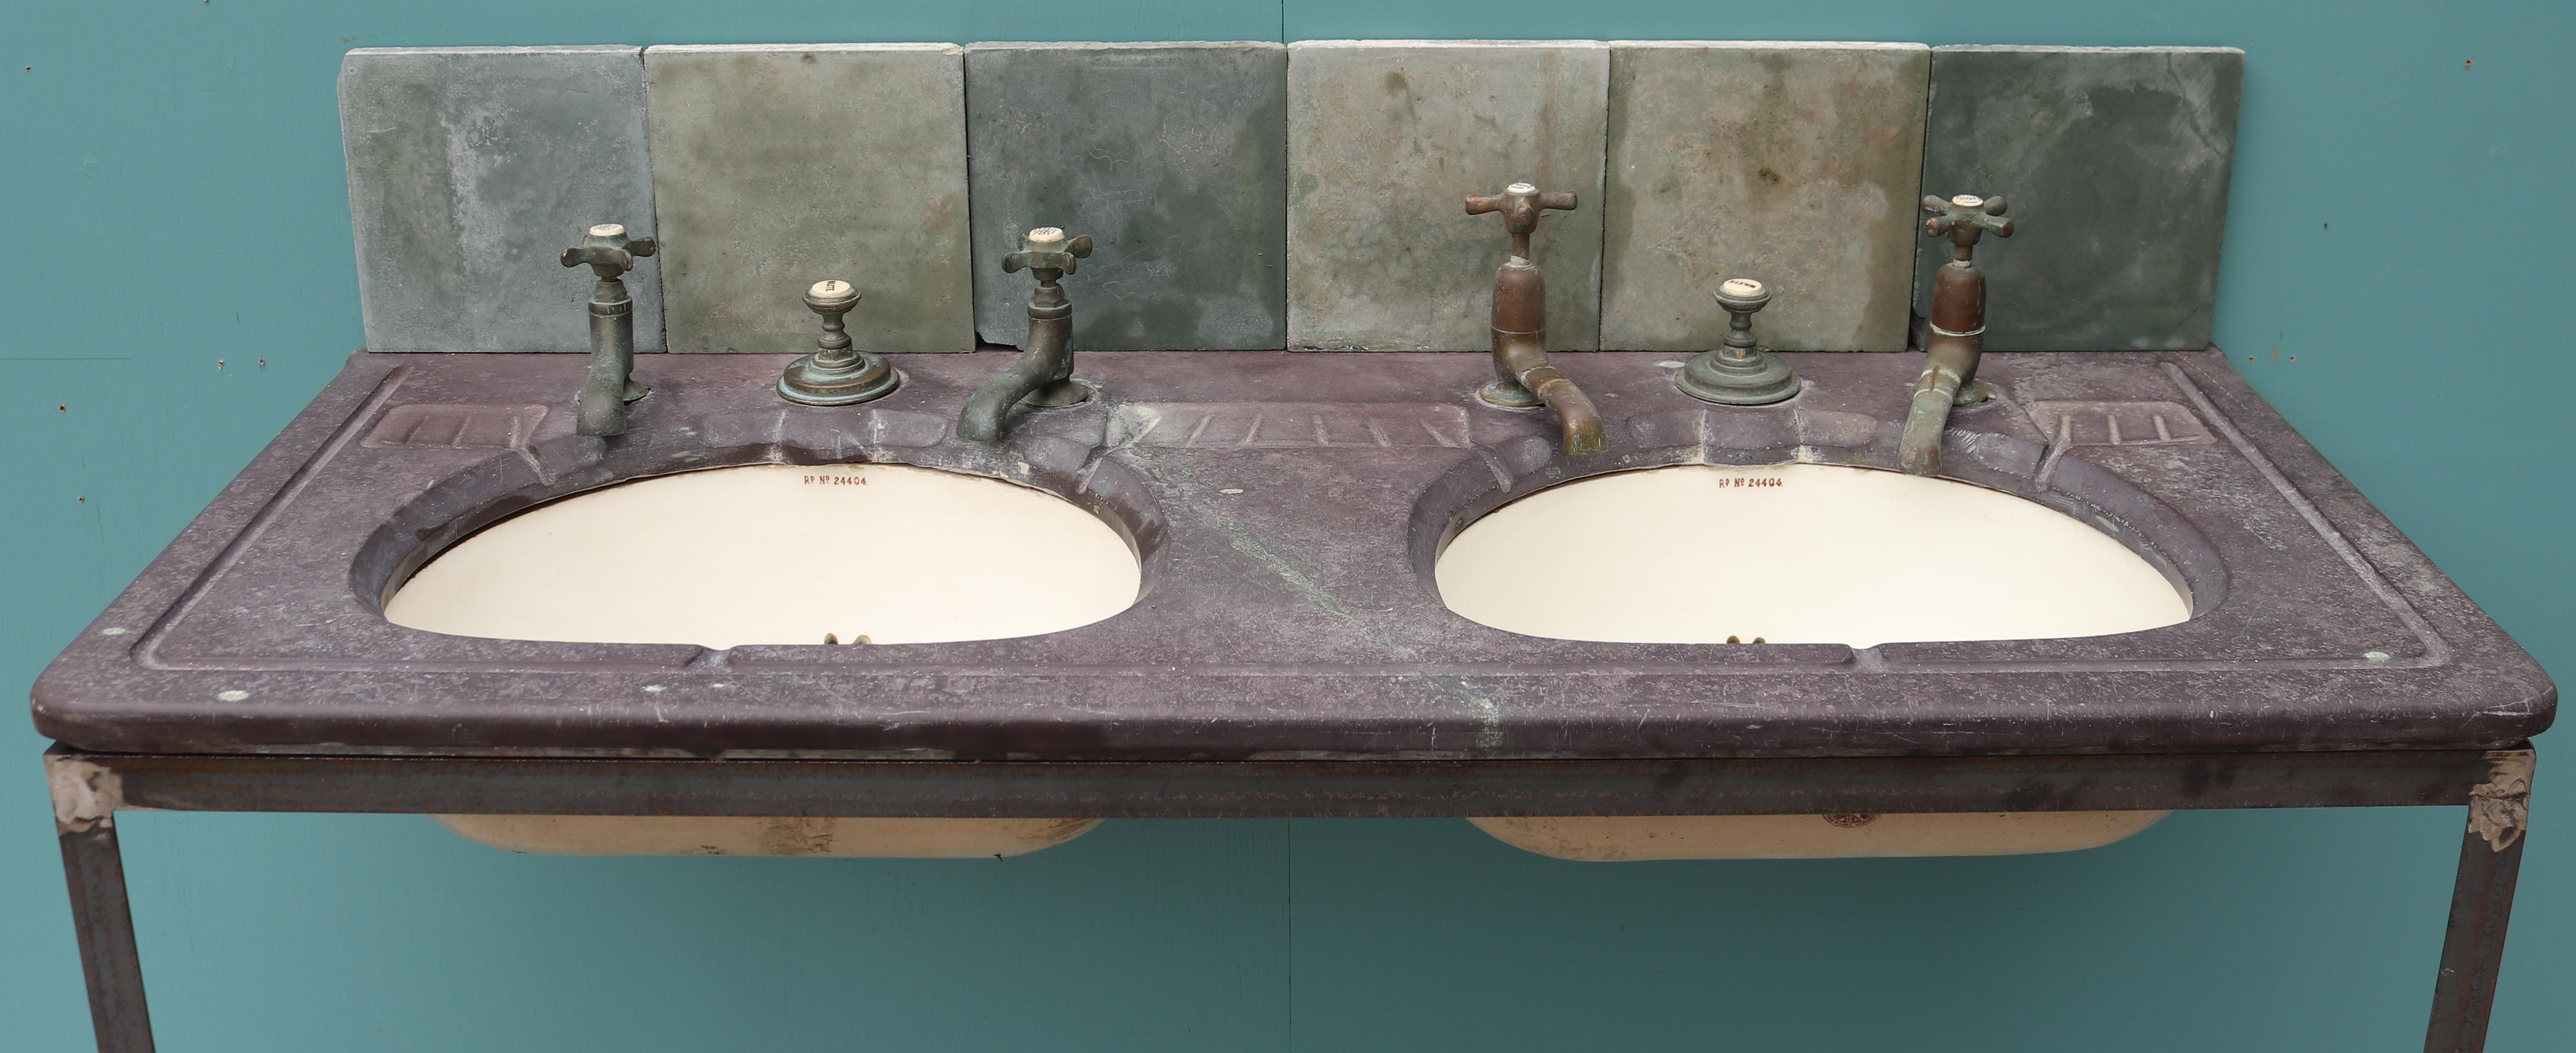 A reclaimed antique double basin or sink by Morrison Ingram & Co. Registered design number 24404. Constructed with a slate top, and under-mounted glazed stoneware basins. Supplied on a modern steel stand and tiles to form a splash-back.
 
We have